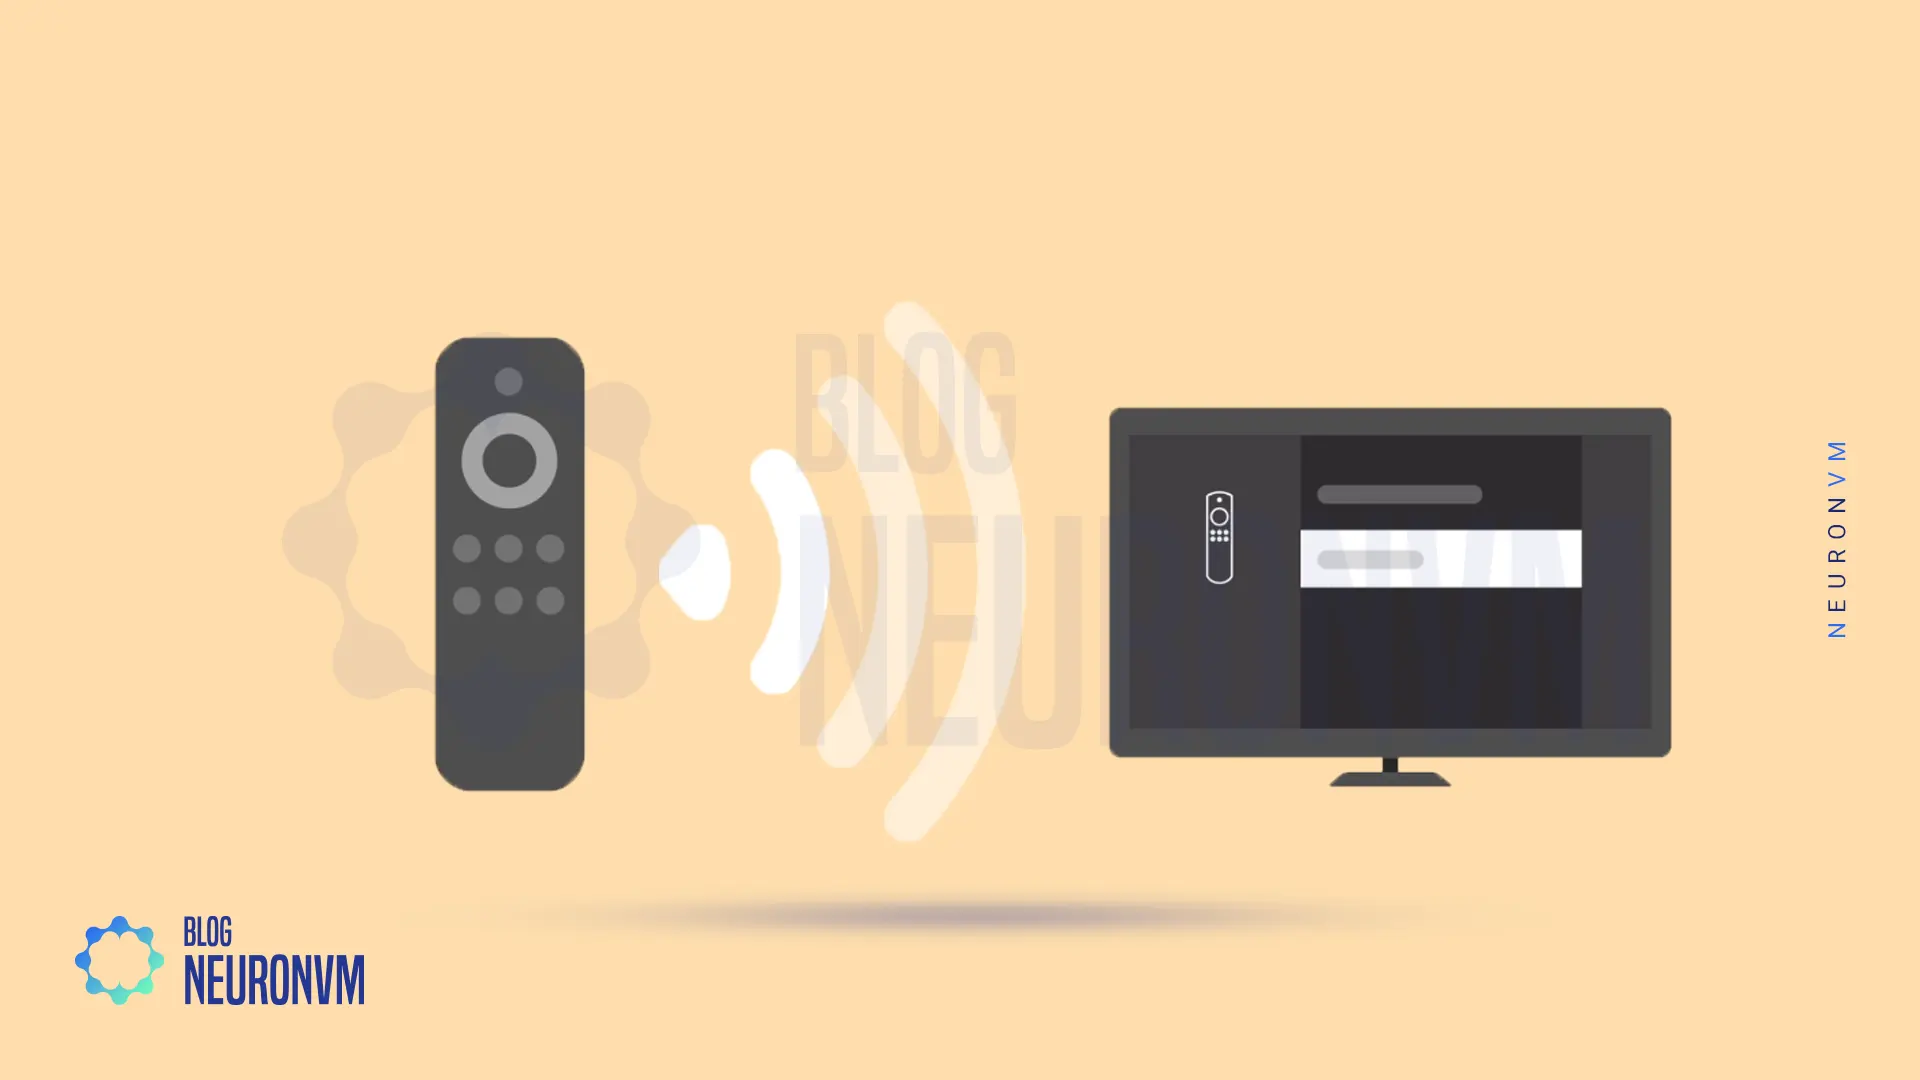 3 Pairing the Firestick Remote